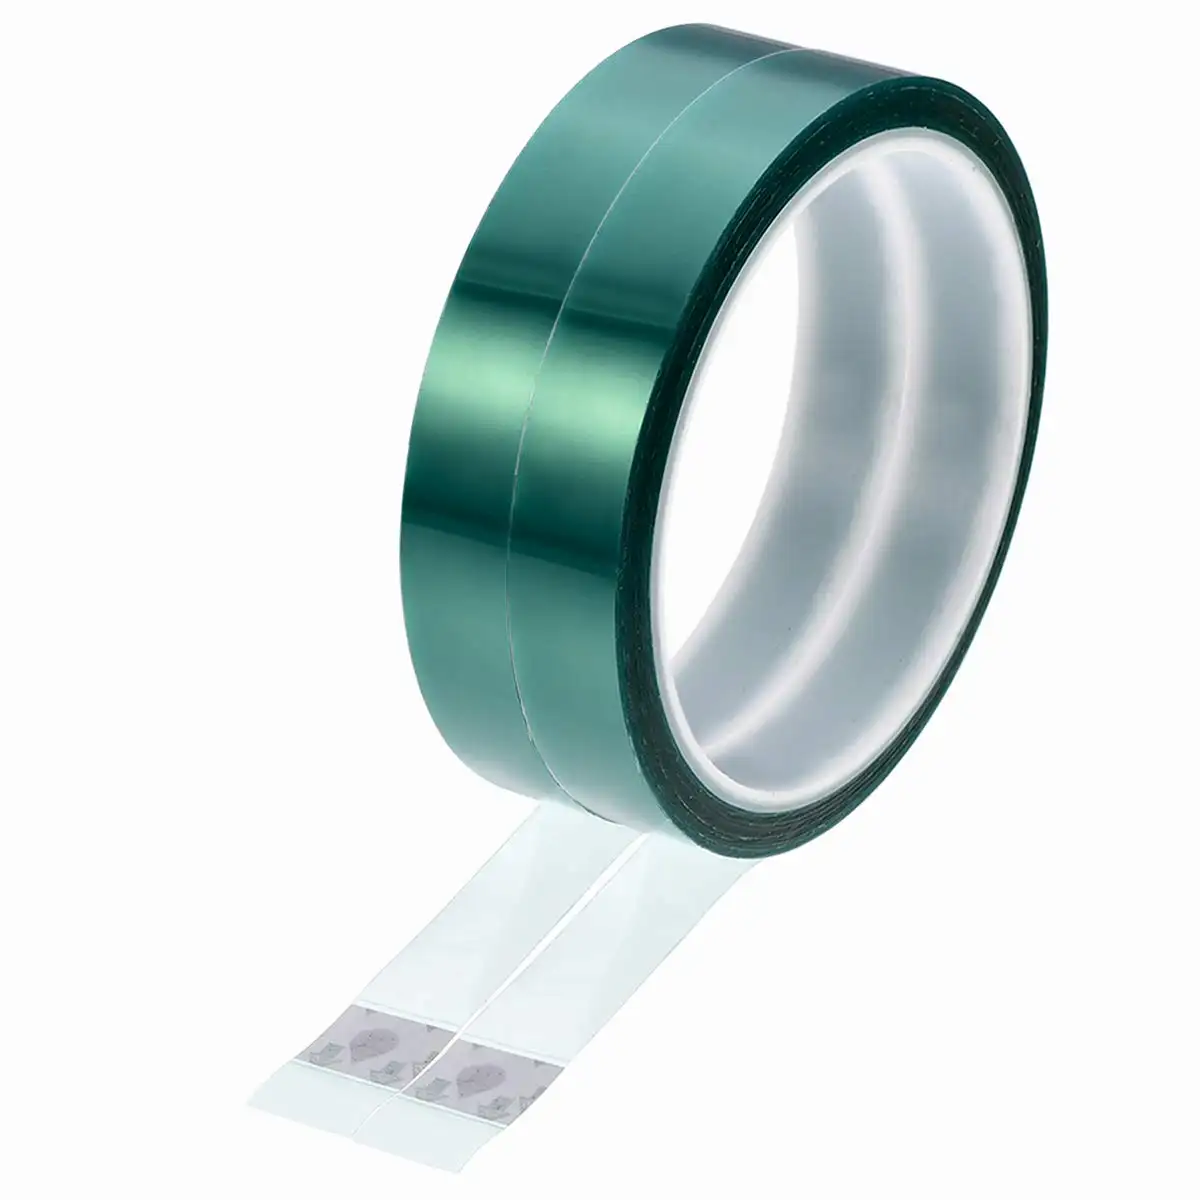 Epoxy Tape Mold, Silicone High Temperature Polyester Film Tape, Used for PCB Electroplating